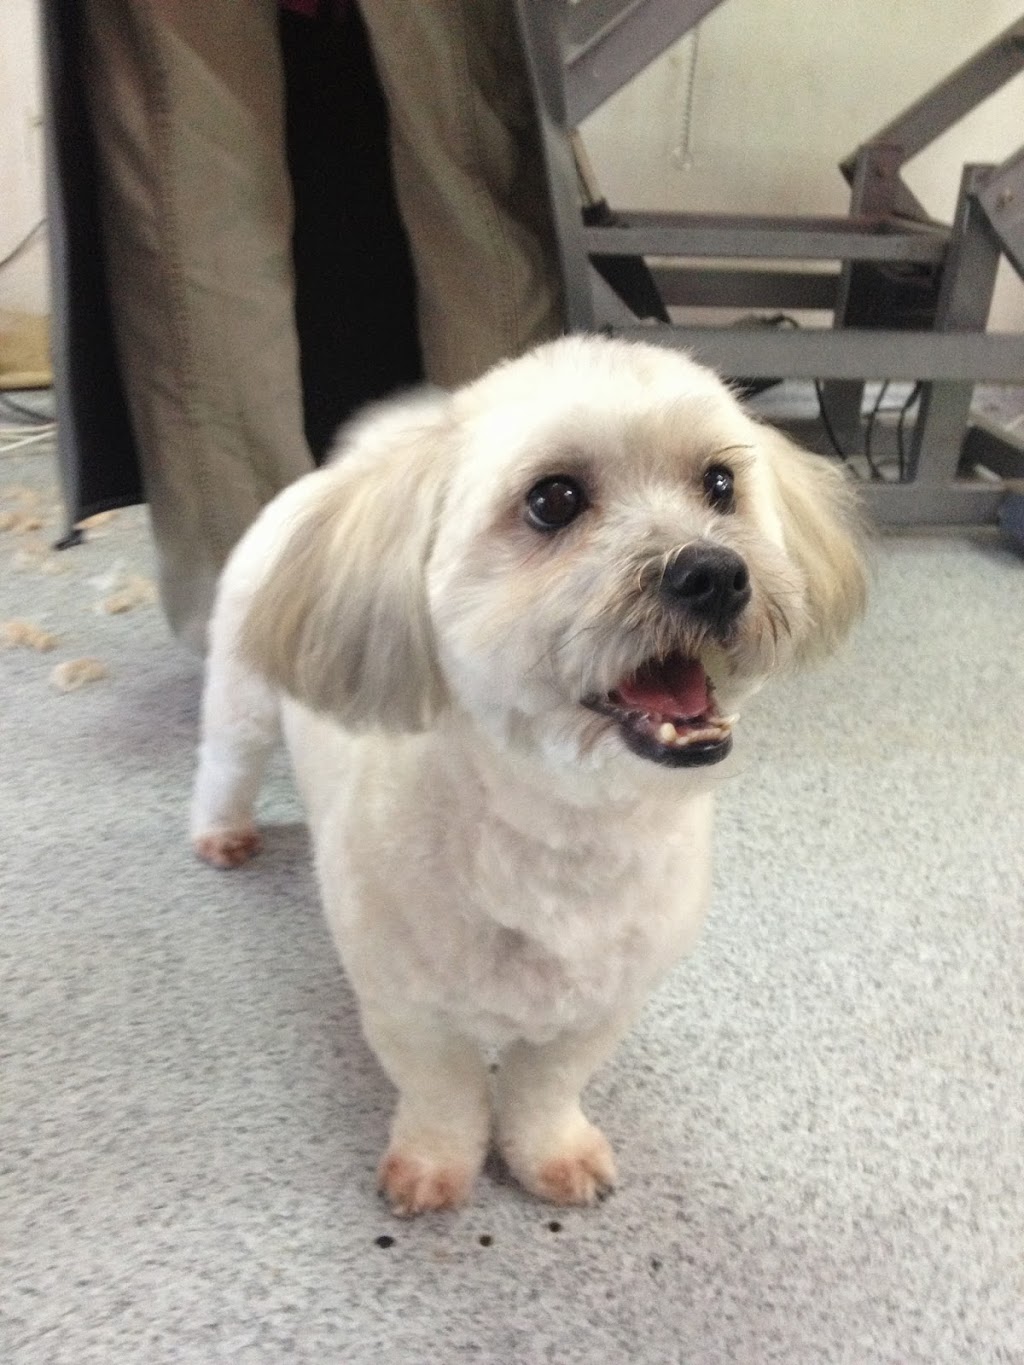 Mucky Mutz Dog Grooming | store | 2/387 Pacific Hwy, Asquith NSW 2077, Australia | 0294777700 OR +61 2 9477 7700